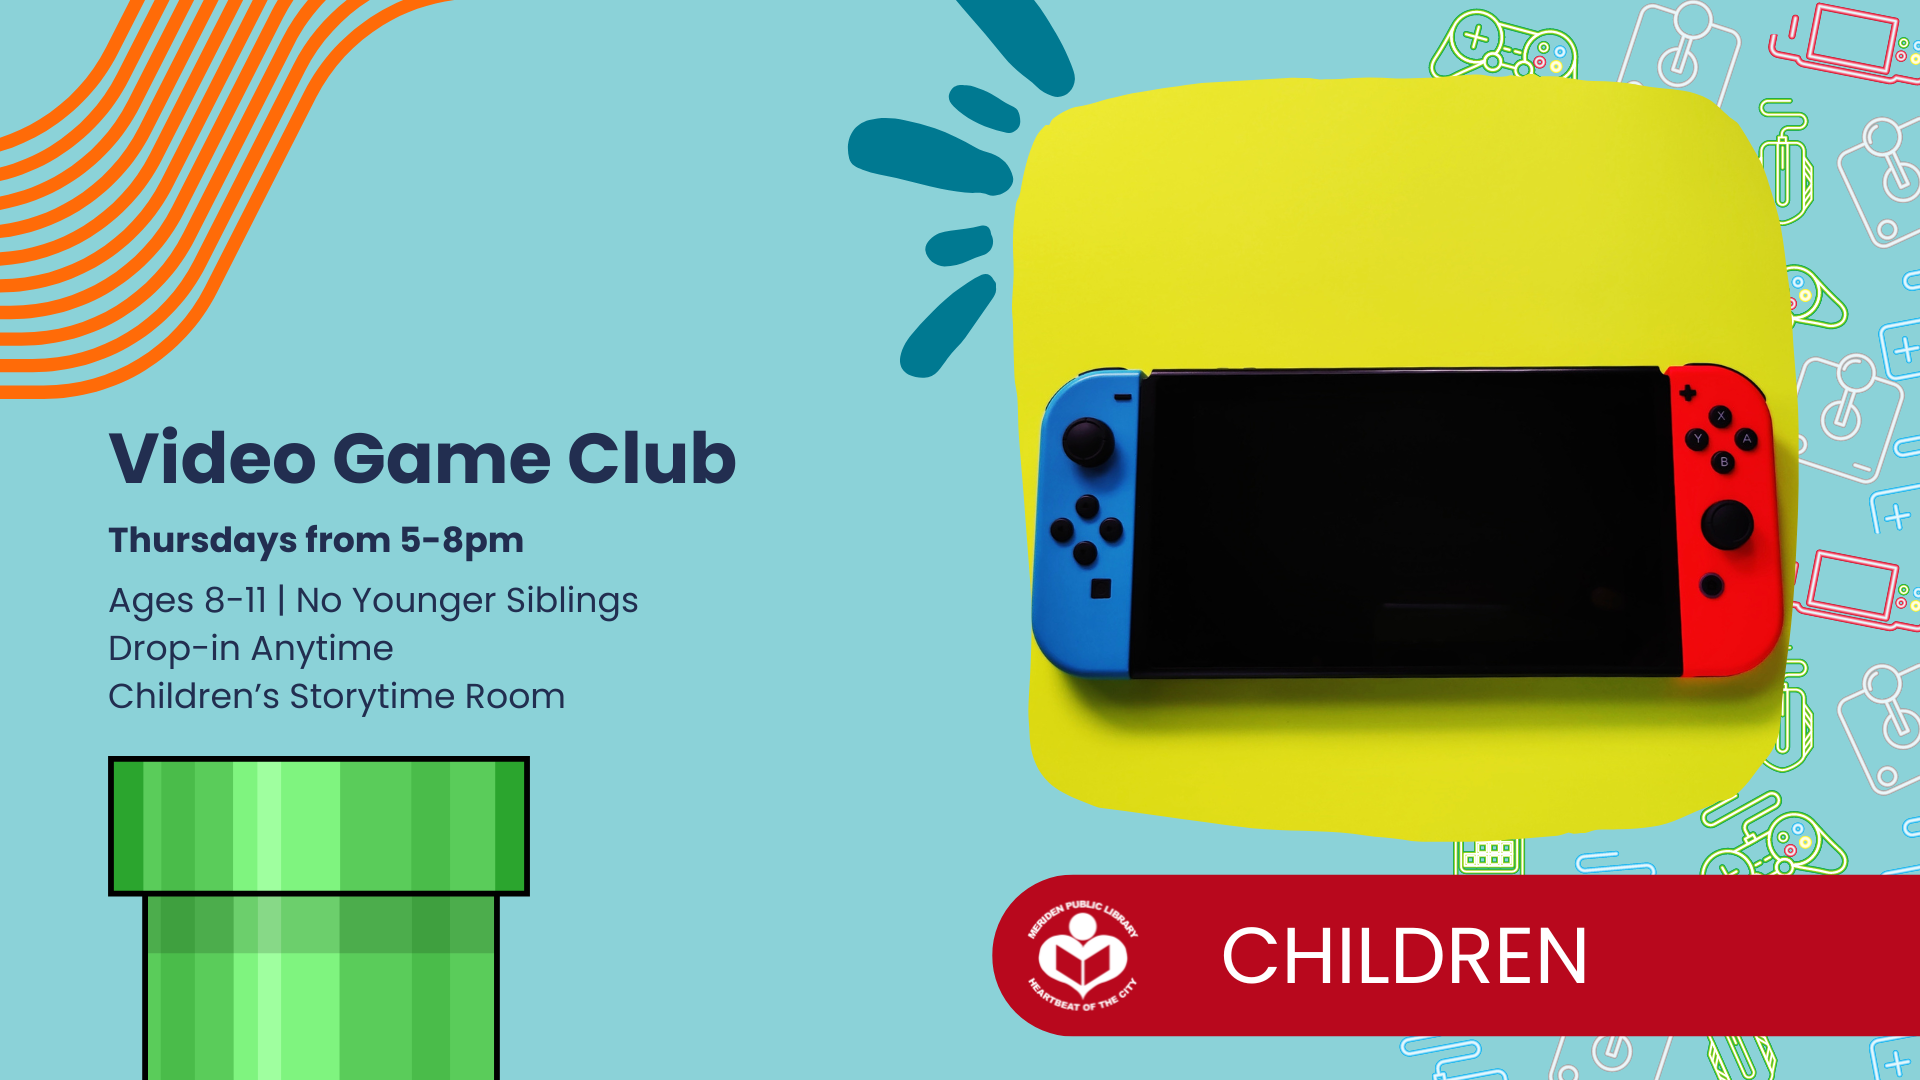 Multi-colored game controller on the right for the Video Game Club